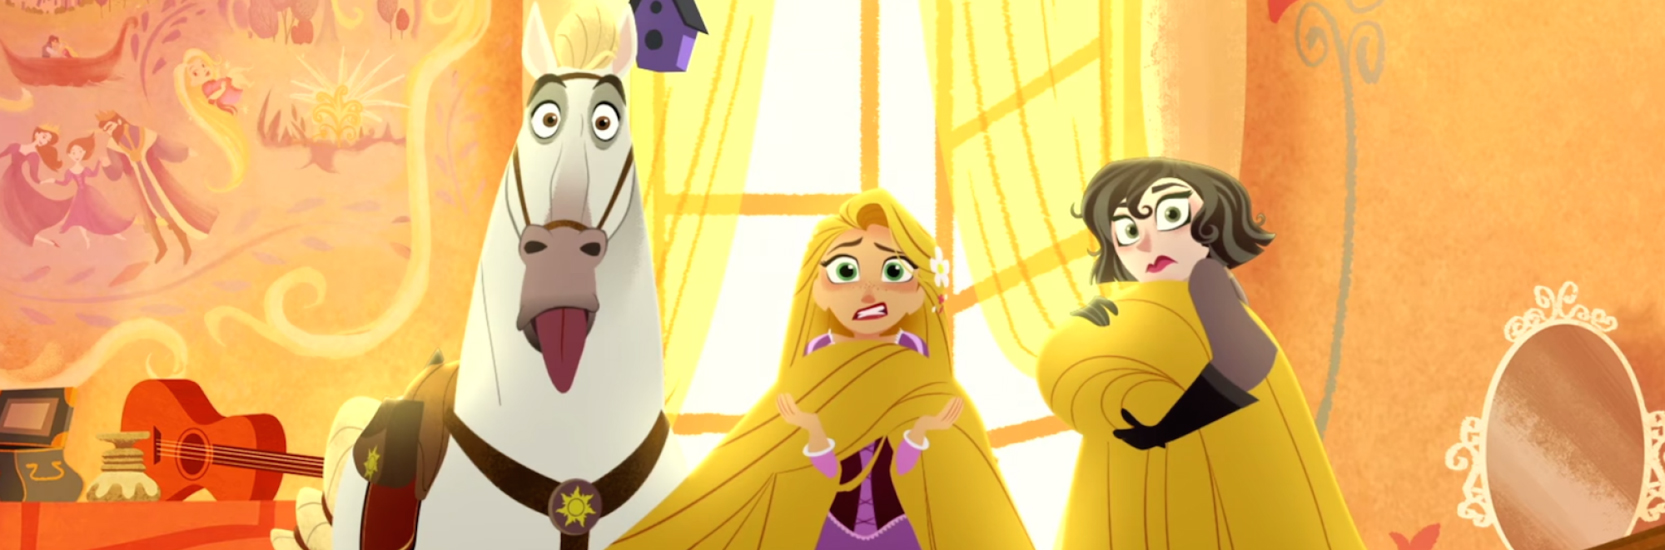 Raiponce et ses blonds cheveux dans Tangled Before Ever After